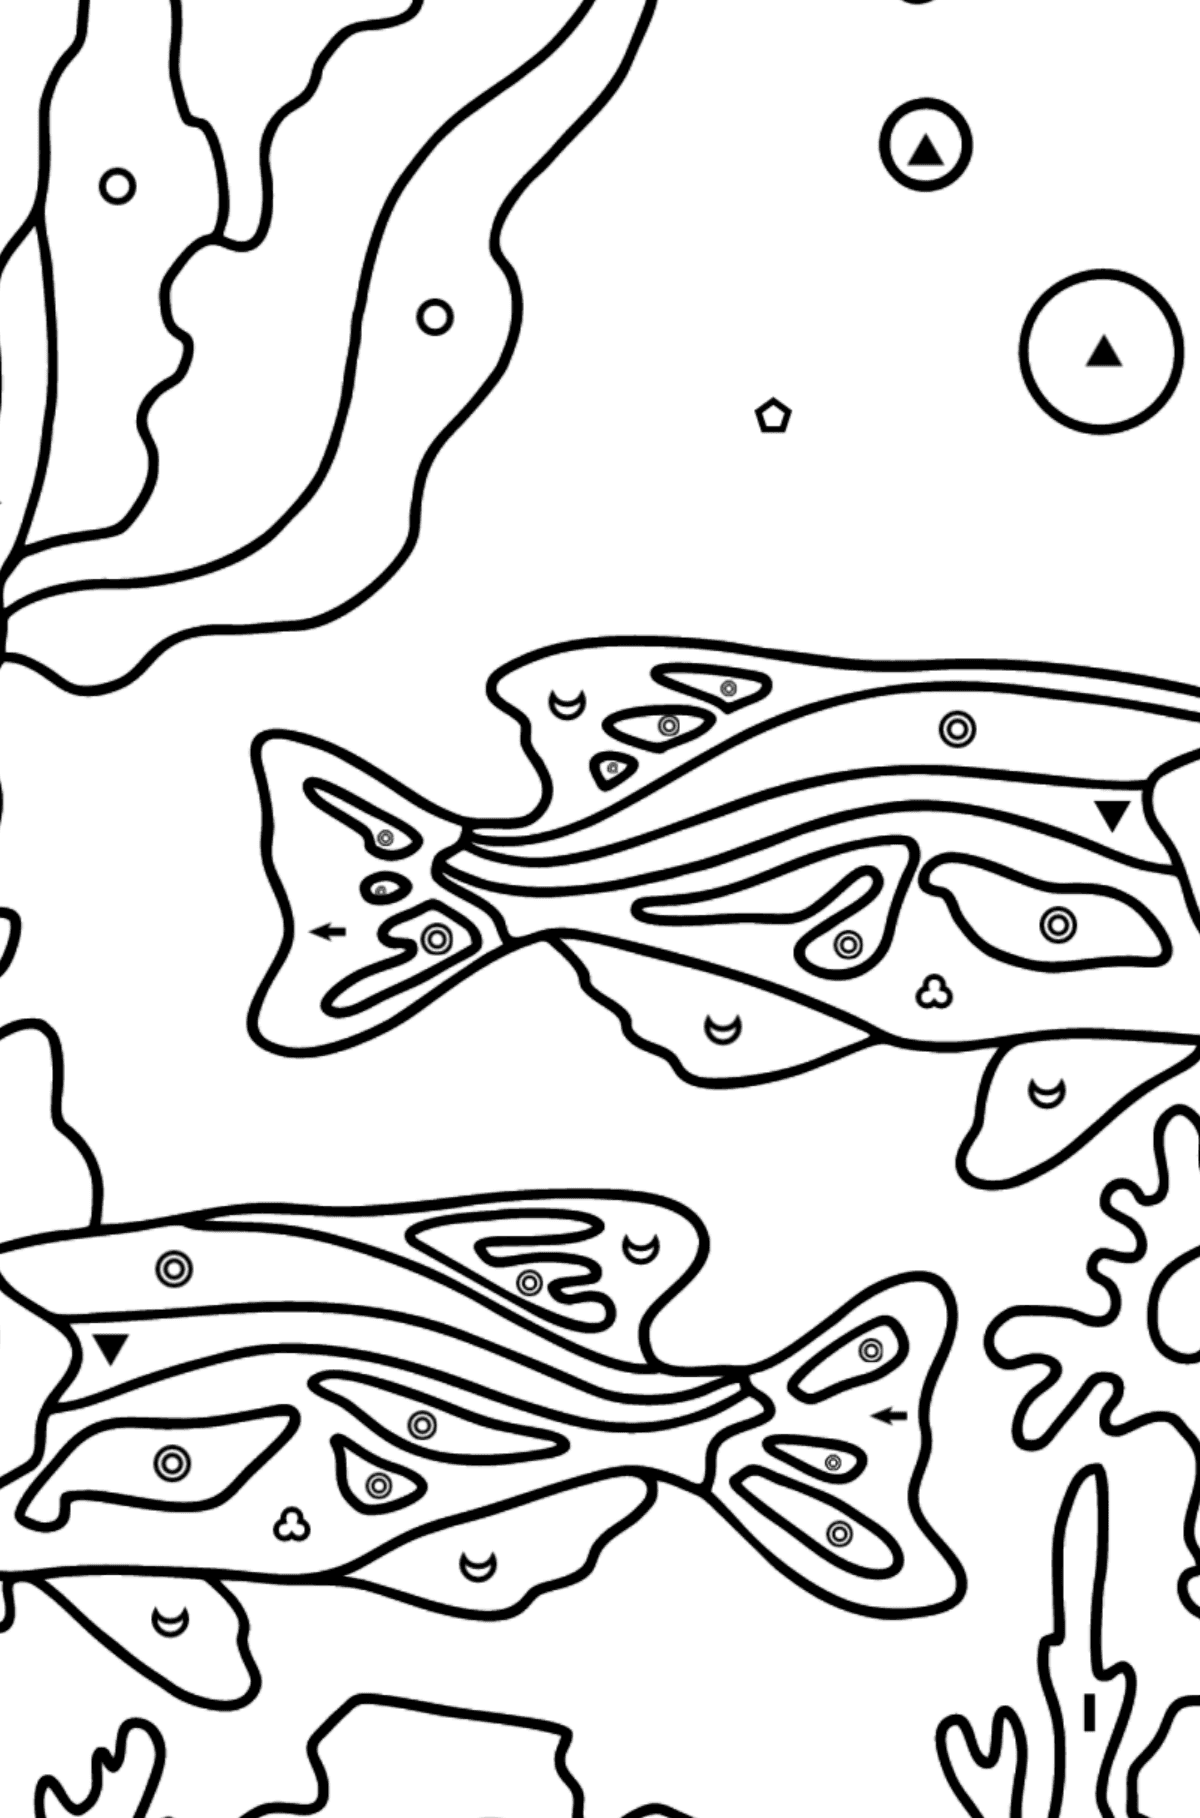 Two Fish Coloring Page - Fish are Swimming Beautifully - Coloring by Symbols and Geometric Shapes for Kids